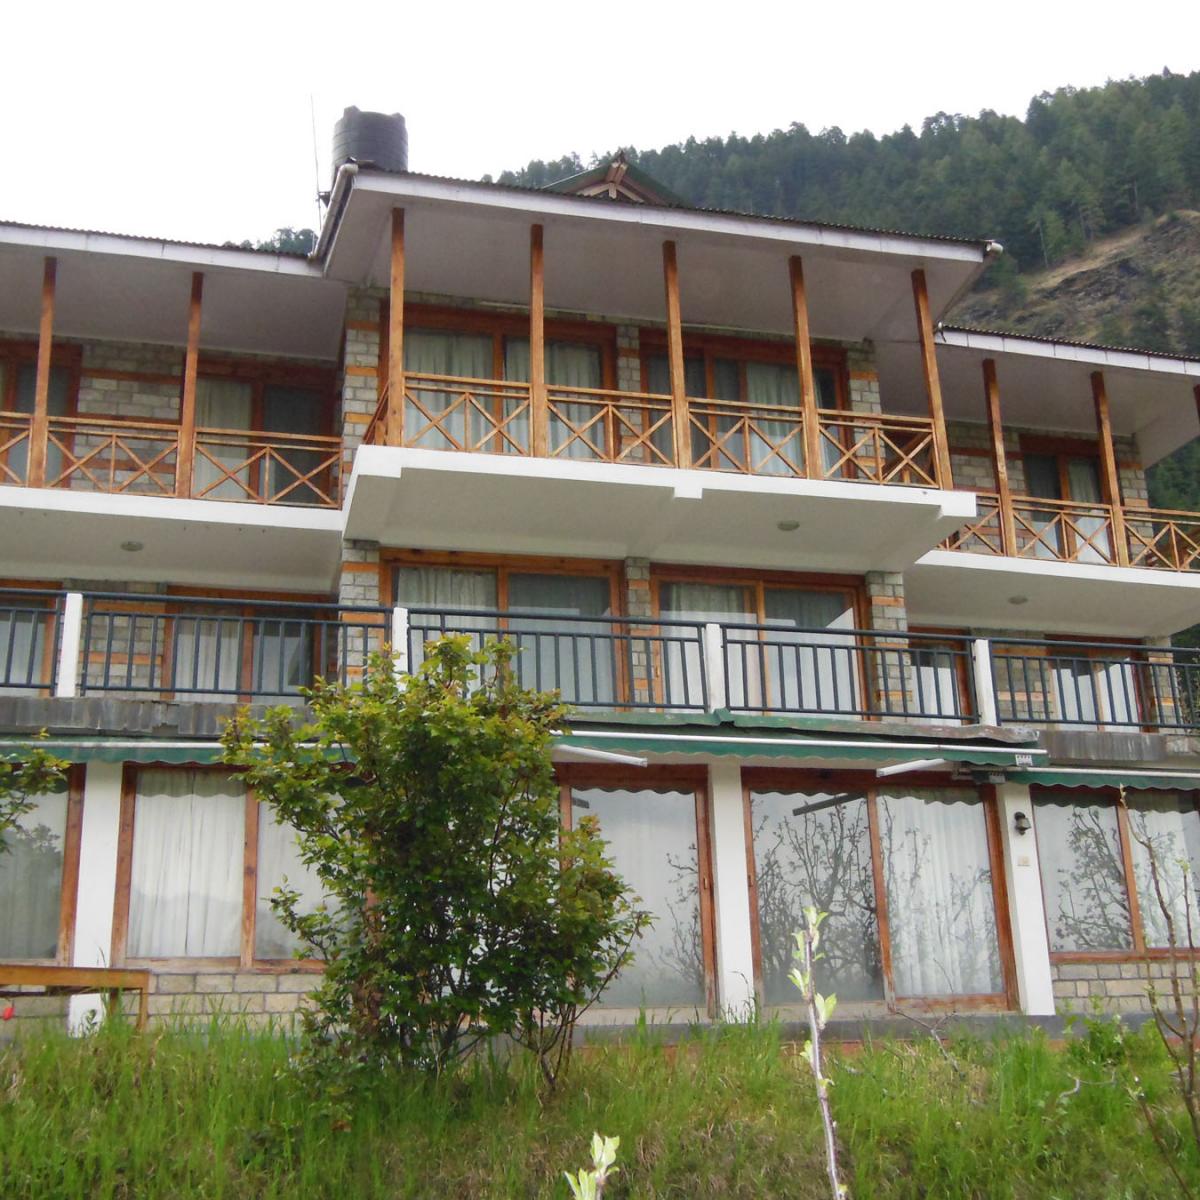 Premier Cottage No.5 - Rustic Cottage in Manali surrounded by Apple Trees